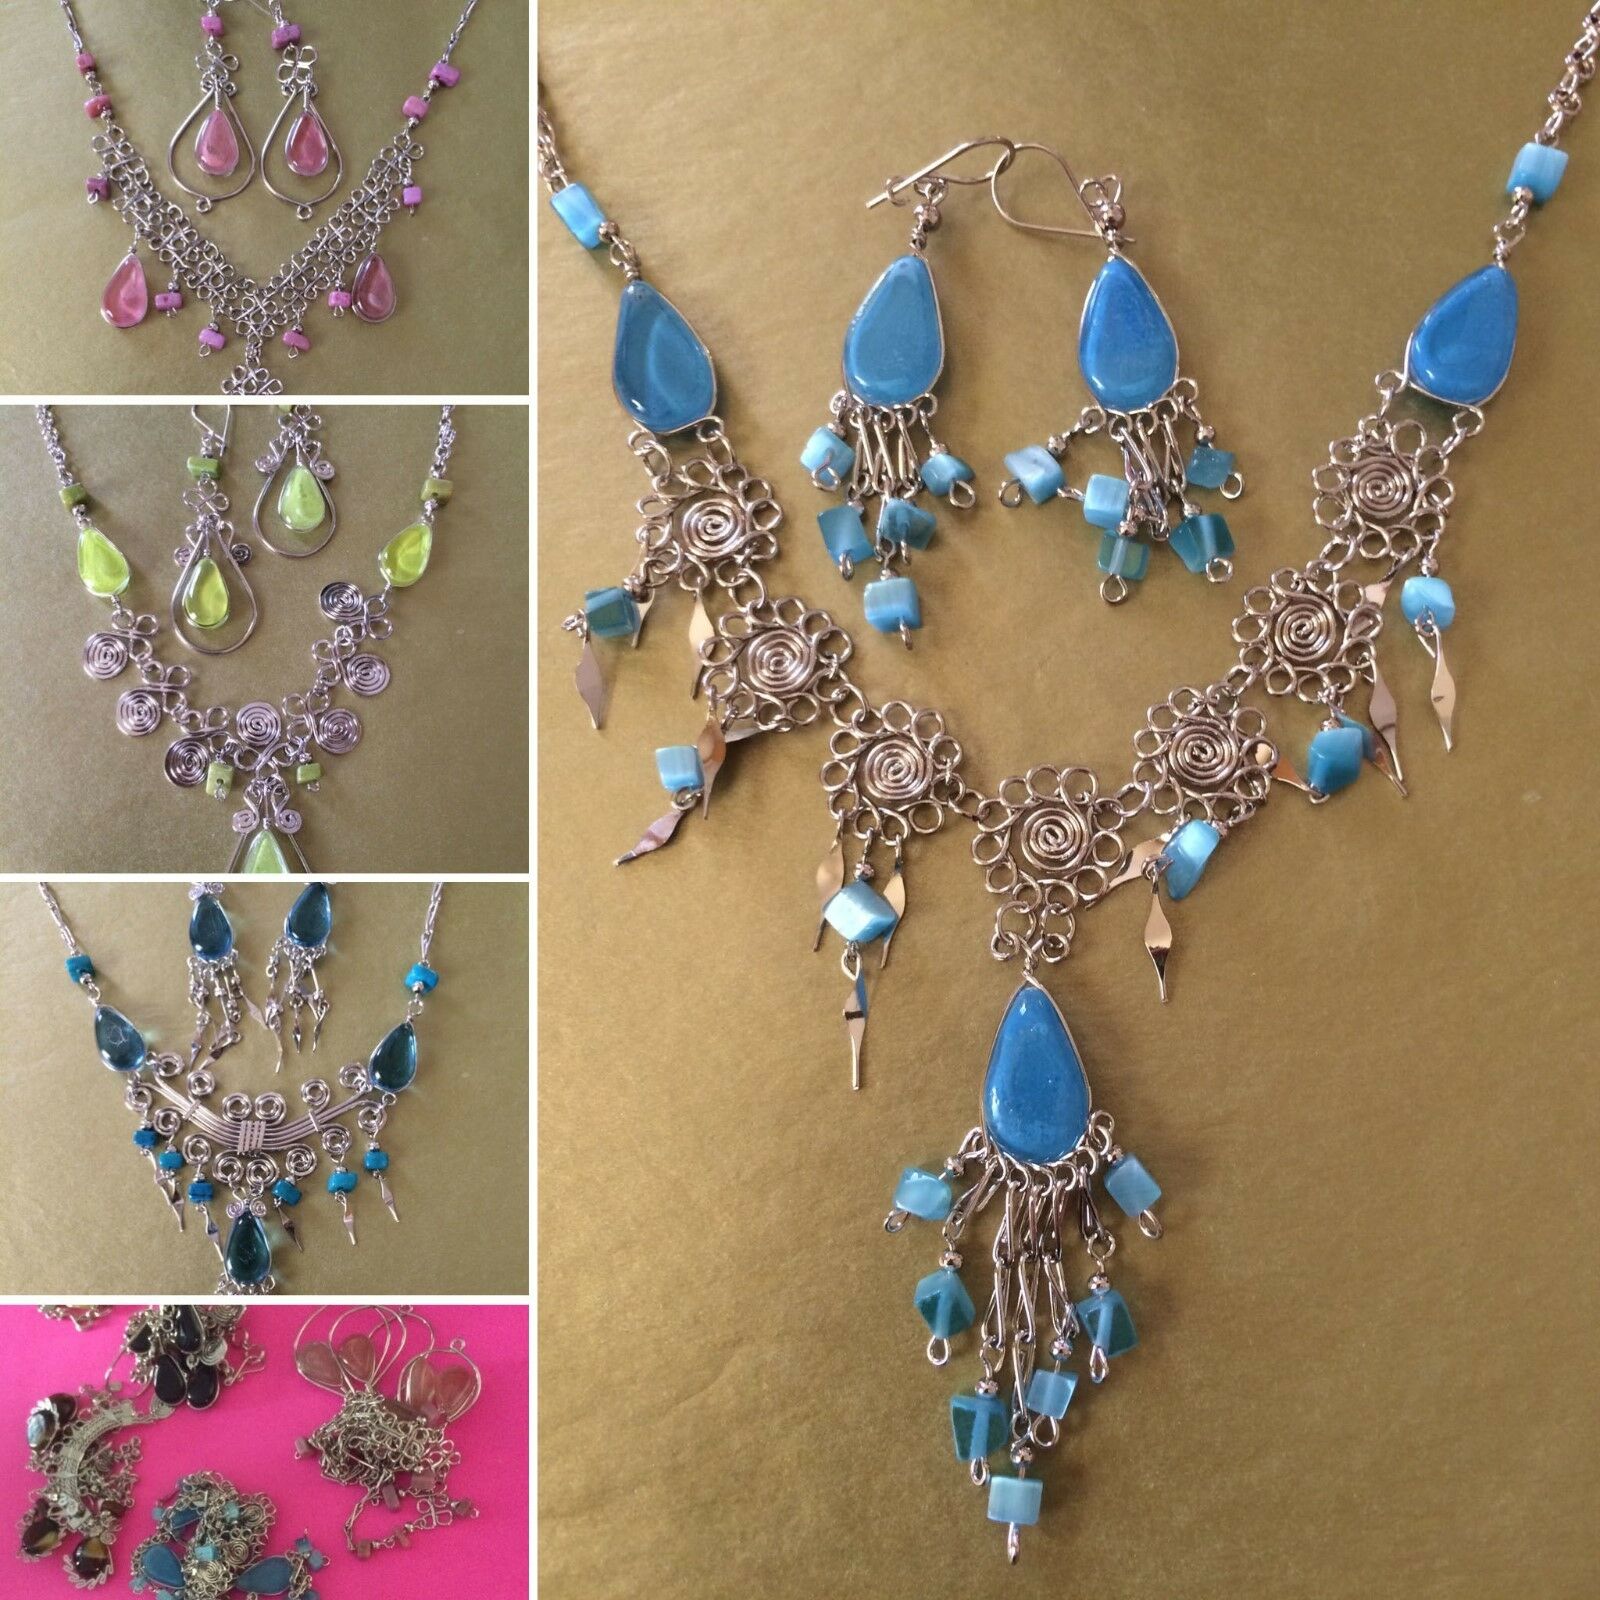 Fine Peruvian Jewelry Necklace And Earrings Set Made Of Alpaca Silver